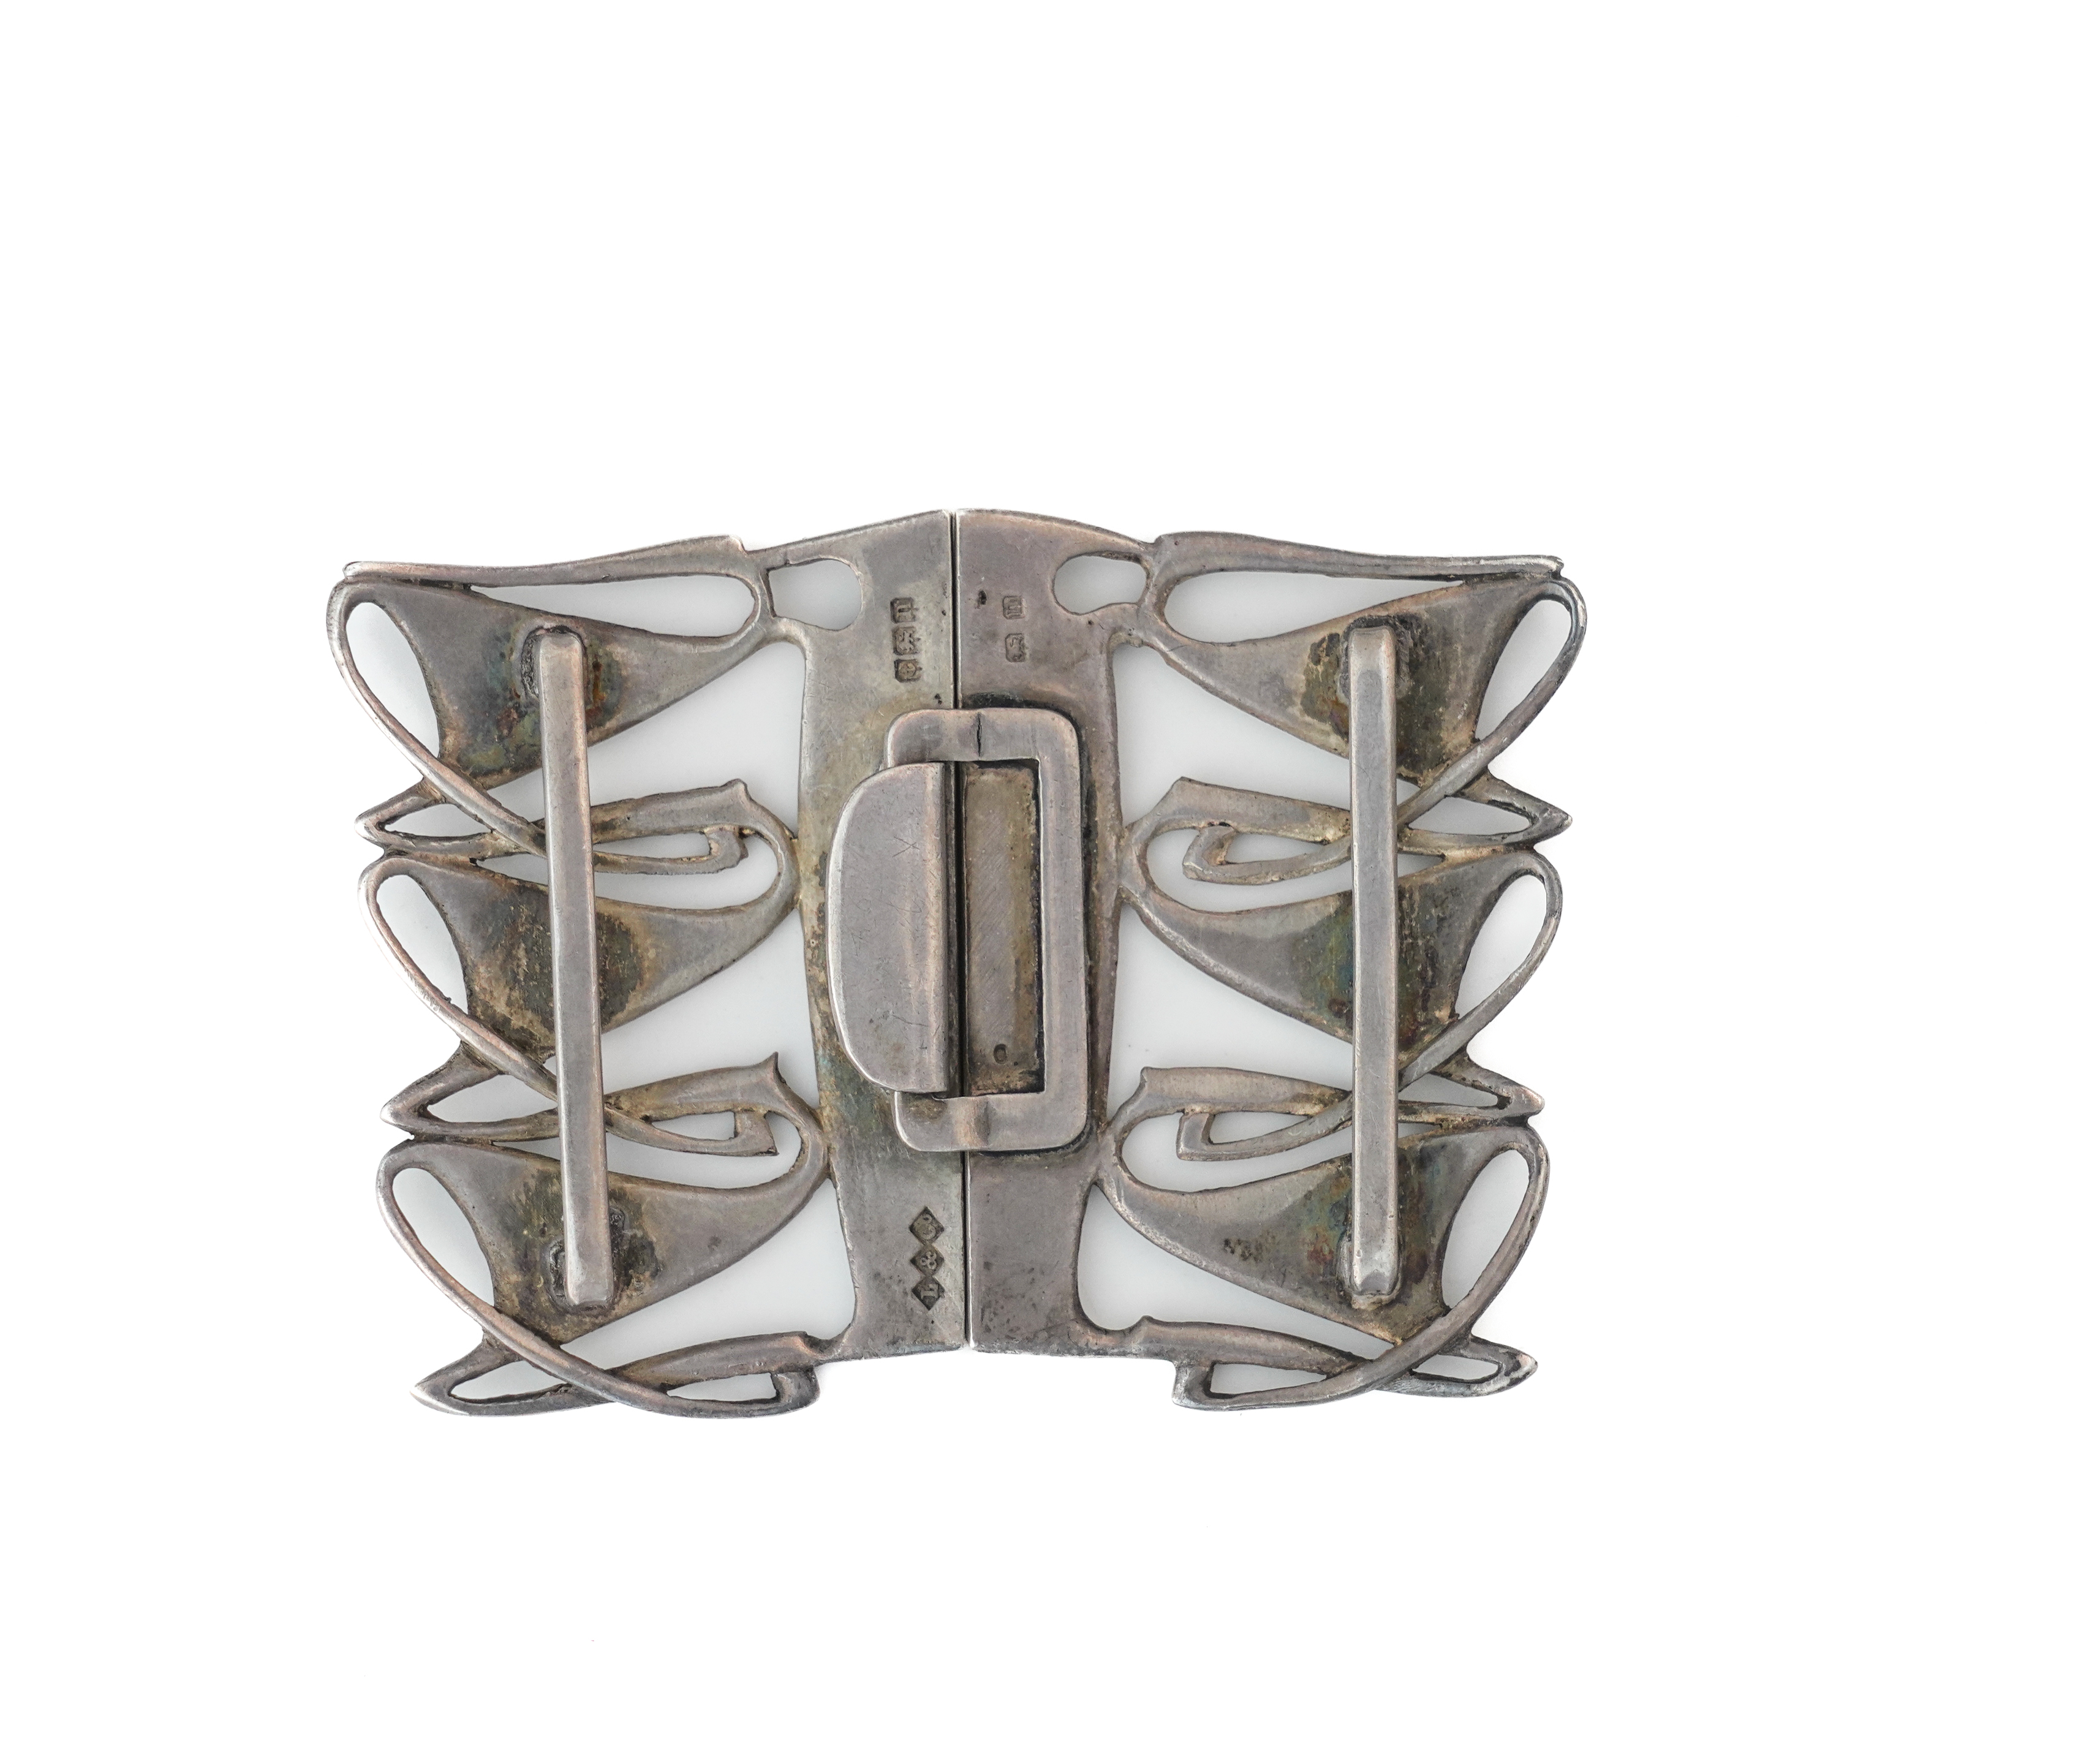 ARCHIBALD KNOX; A LIBERTY AND CO SILVER AND ENAMELLED TWO PIECE ART NOUVEAU WAISTBELT BUCKLE... - Image 4 of 4